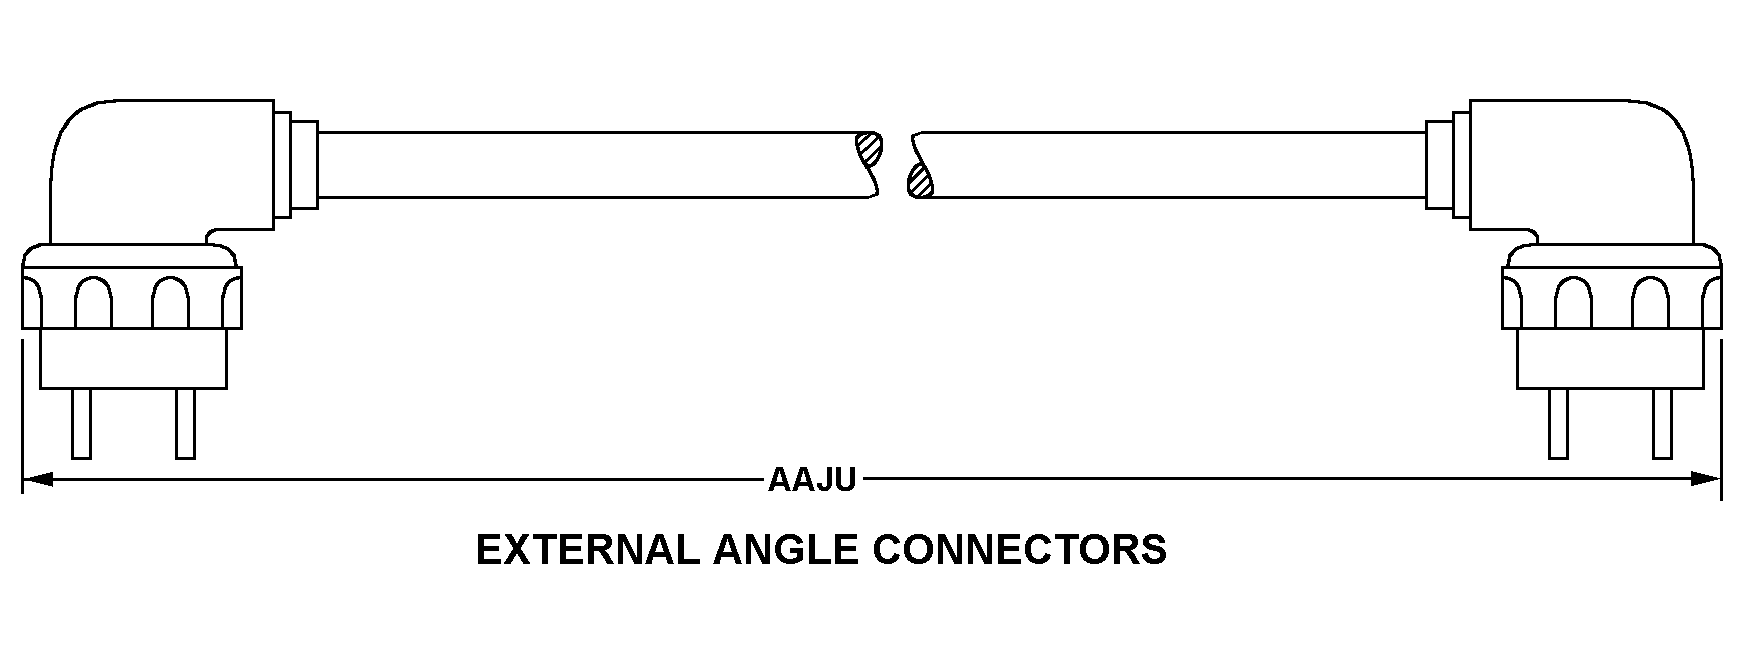 EXTERNAL ANGLE CONNECTORS style nsn 5995-01-333-6565